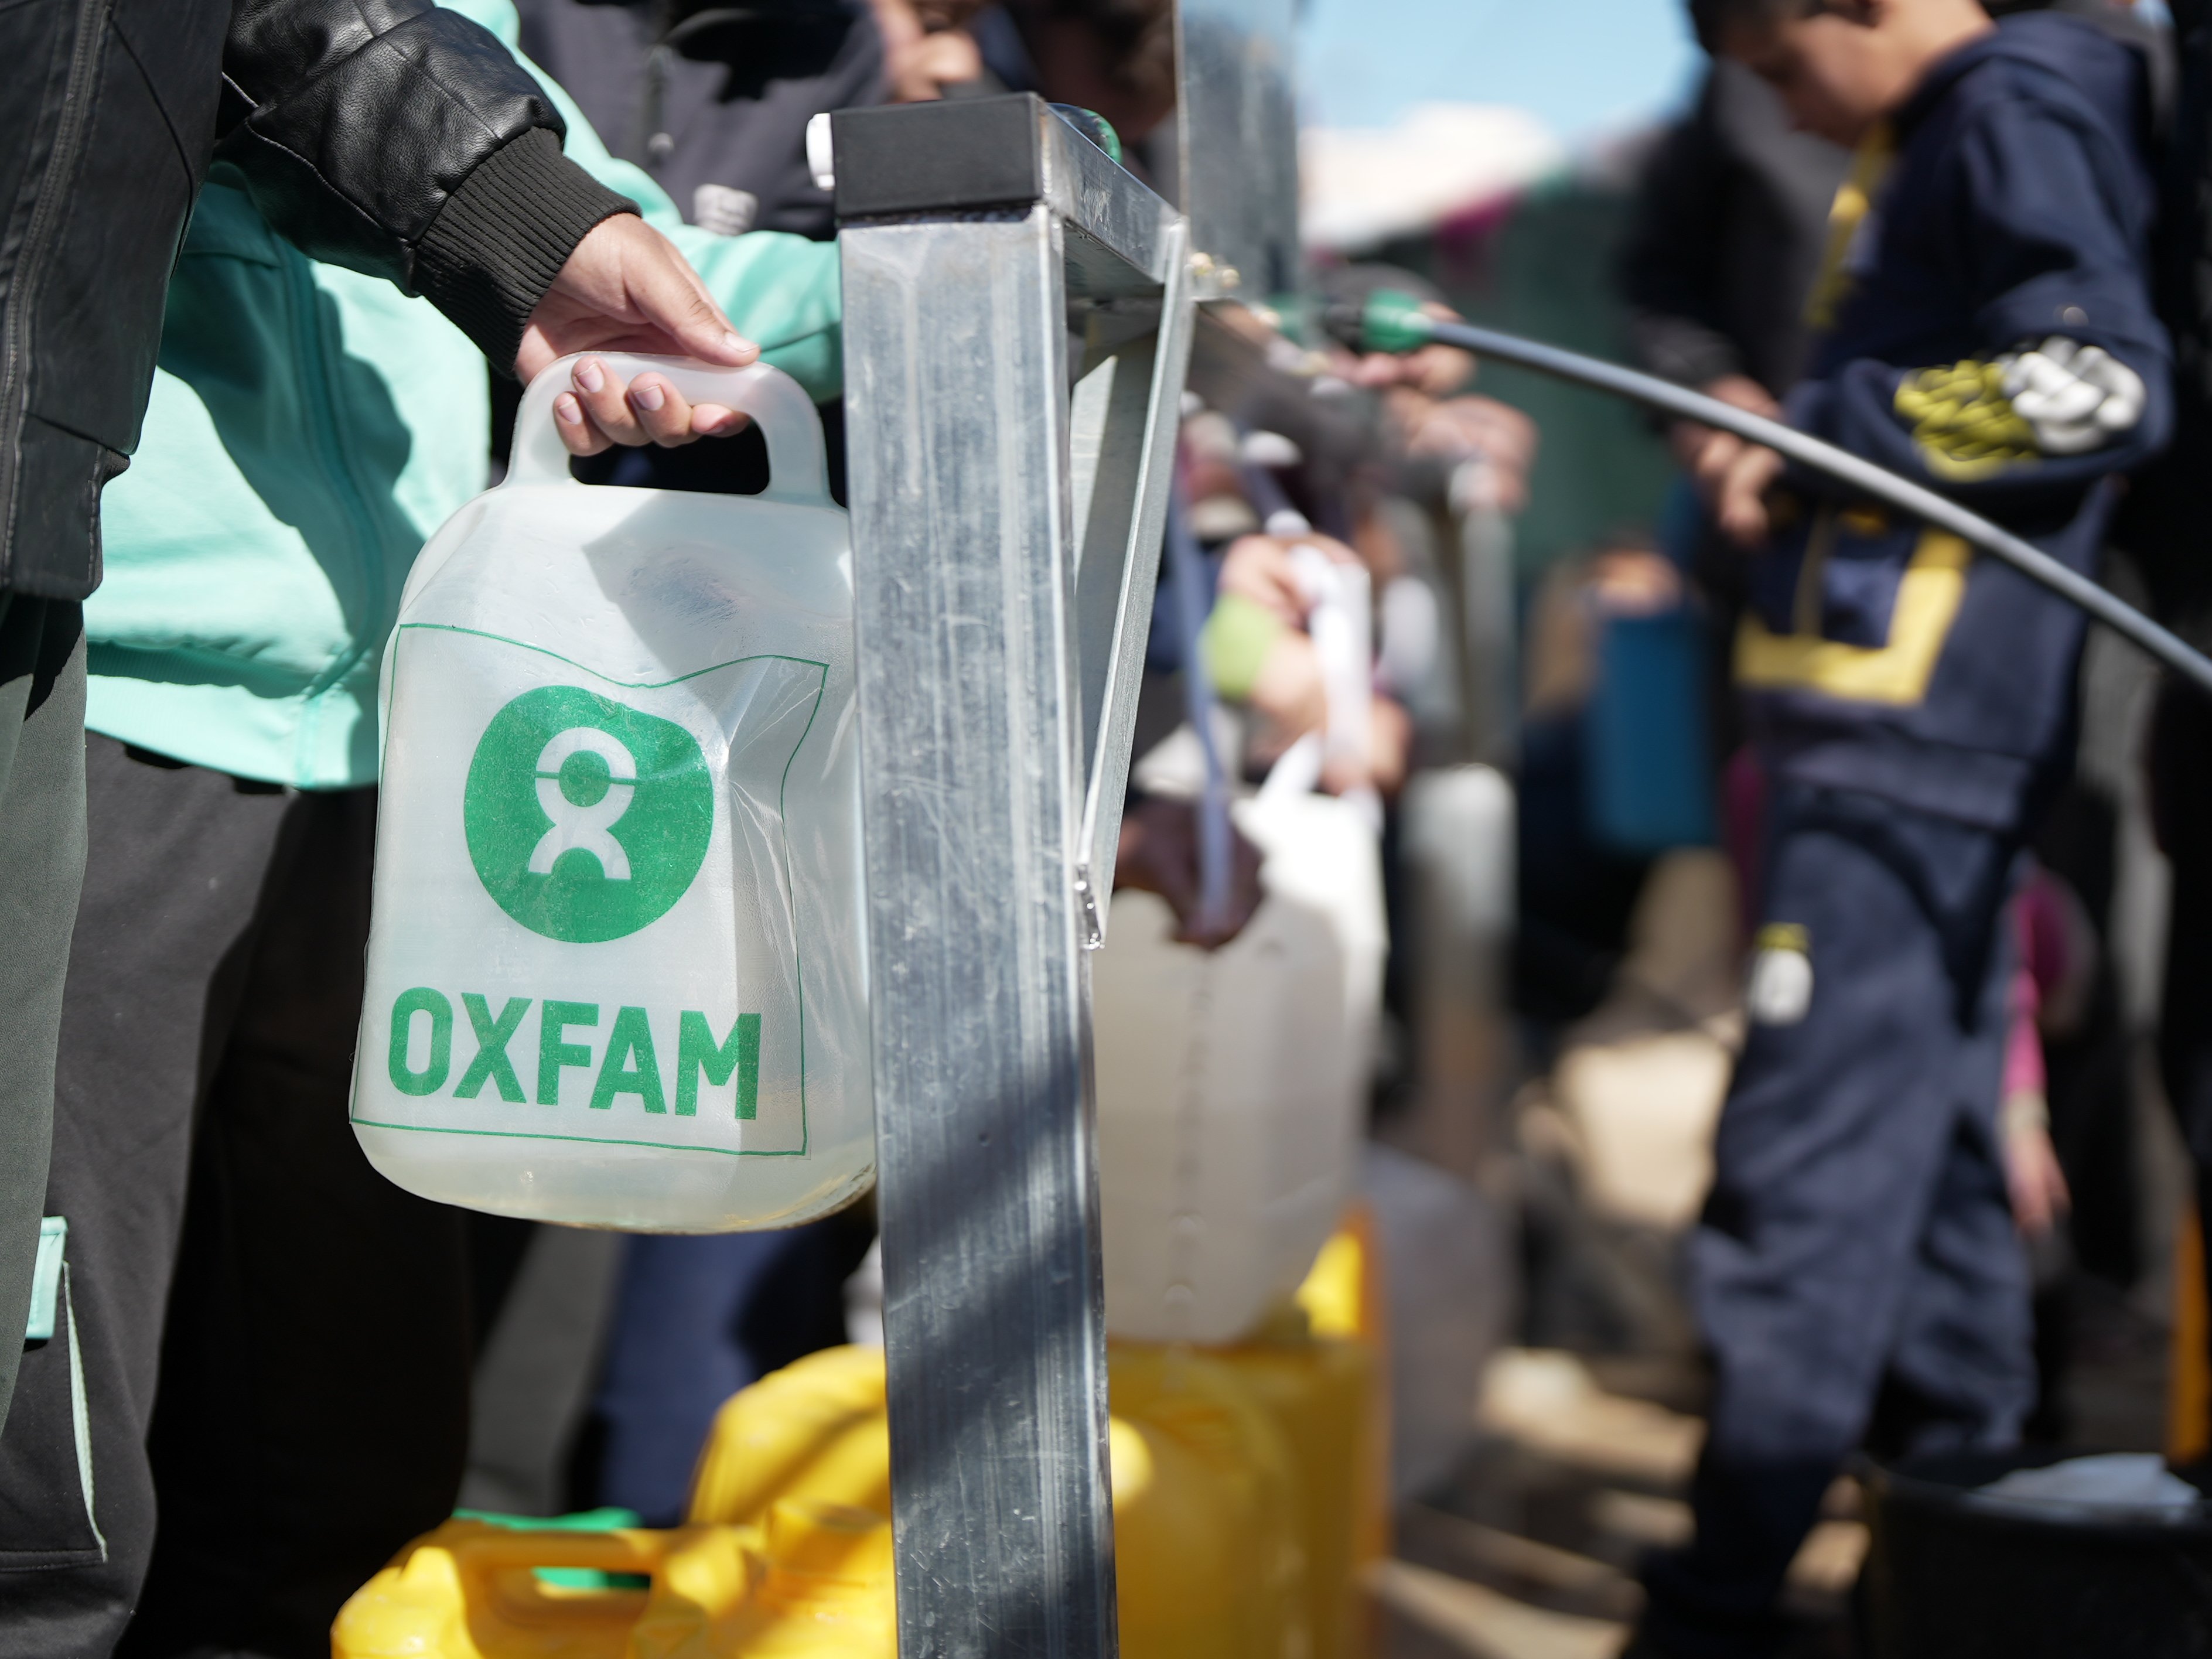 In collaboration with our local partners, Oxfam is working to address this crisis. We've identified 11 informal settlement sites in Khan Younis and Rafah, where a significant number of internally displaced persons (IDPs) are located and where water wells are accessible. 